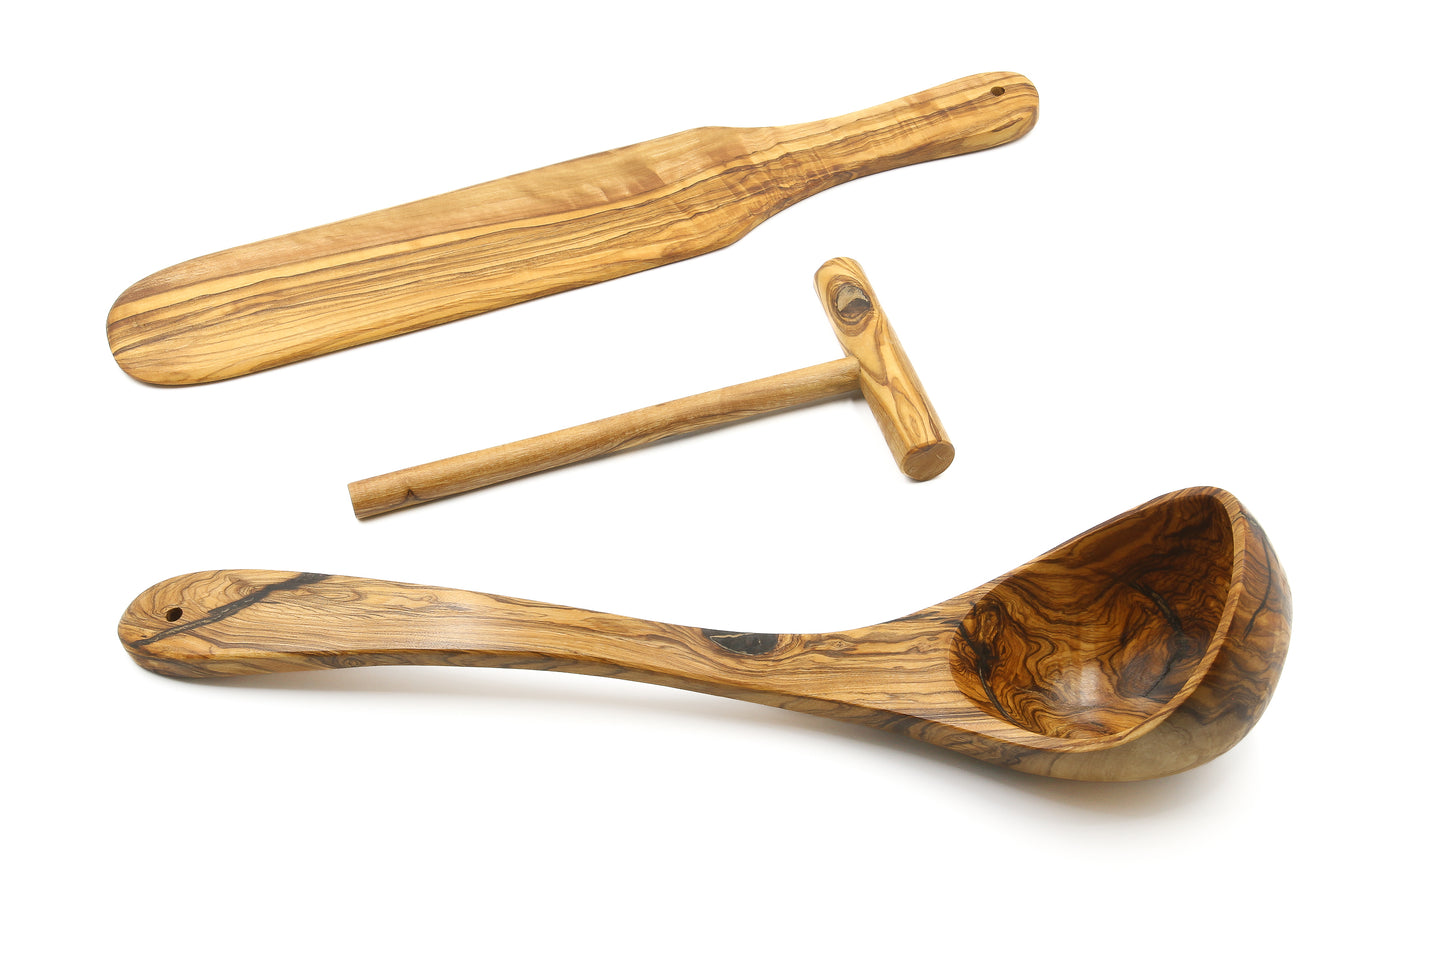 A must-have for chefs: olive wood crepe/pancake baking set, Professional set